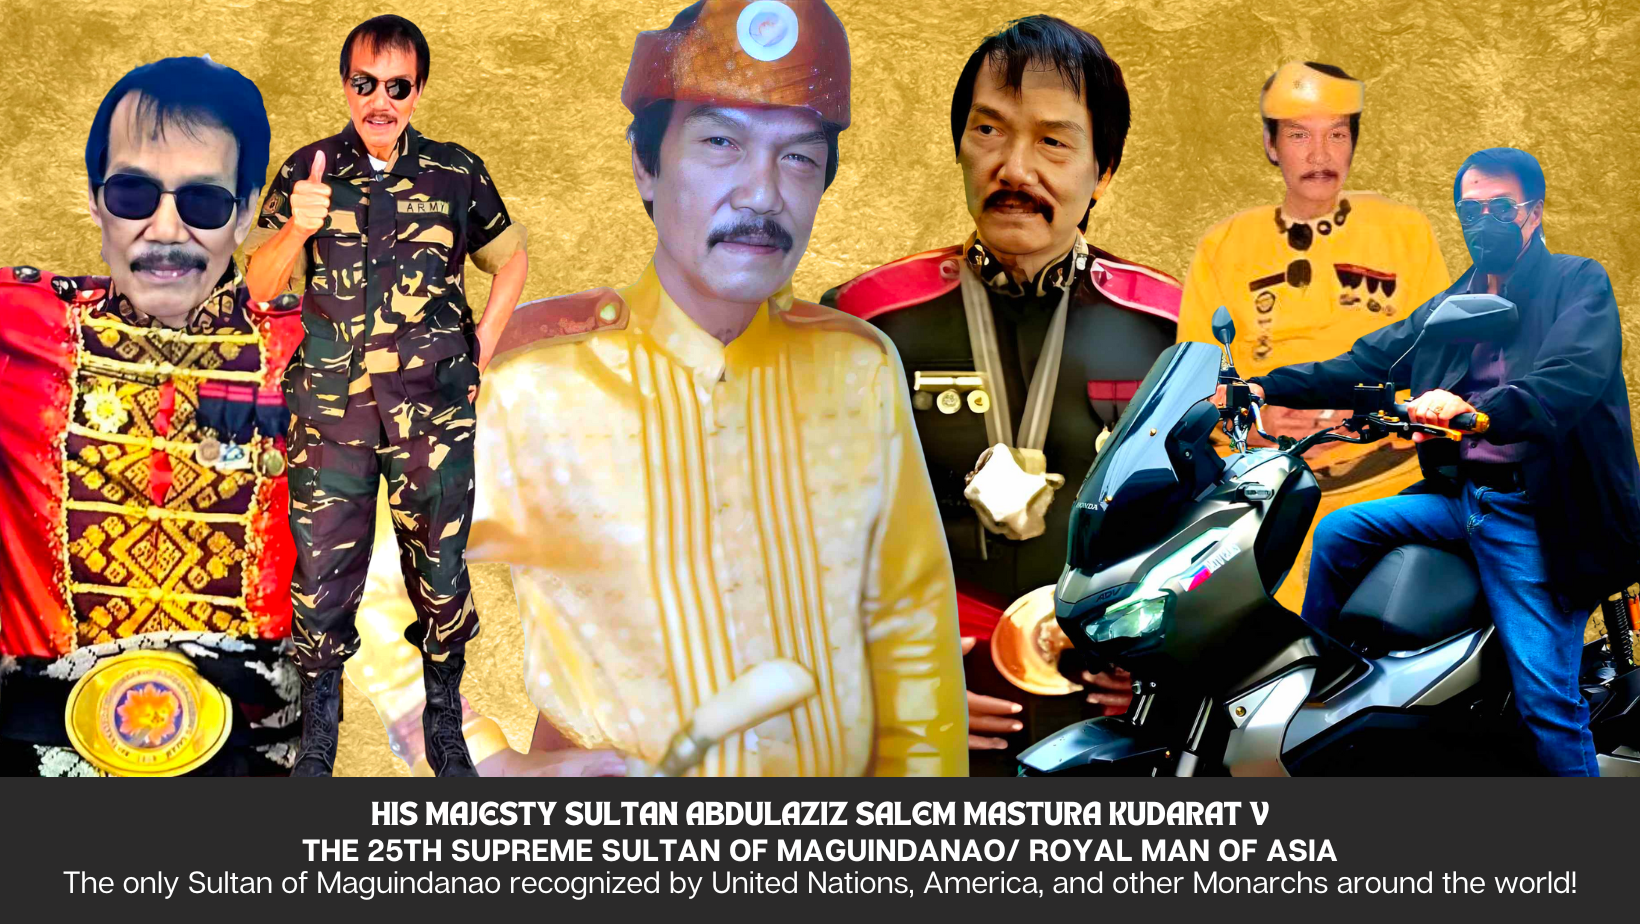 The Passing of the Sultan of Maguindanao Drew Thousands of Sympathizers Around the World